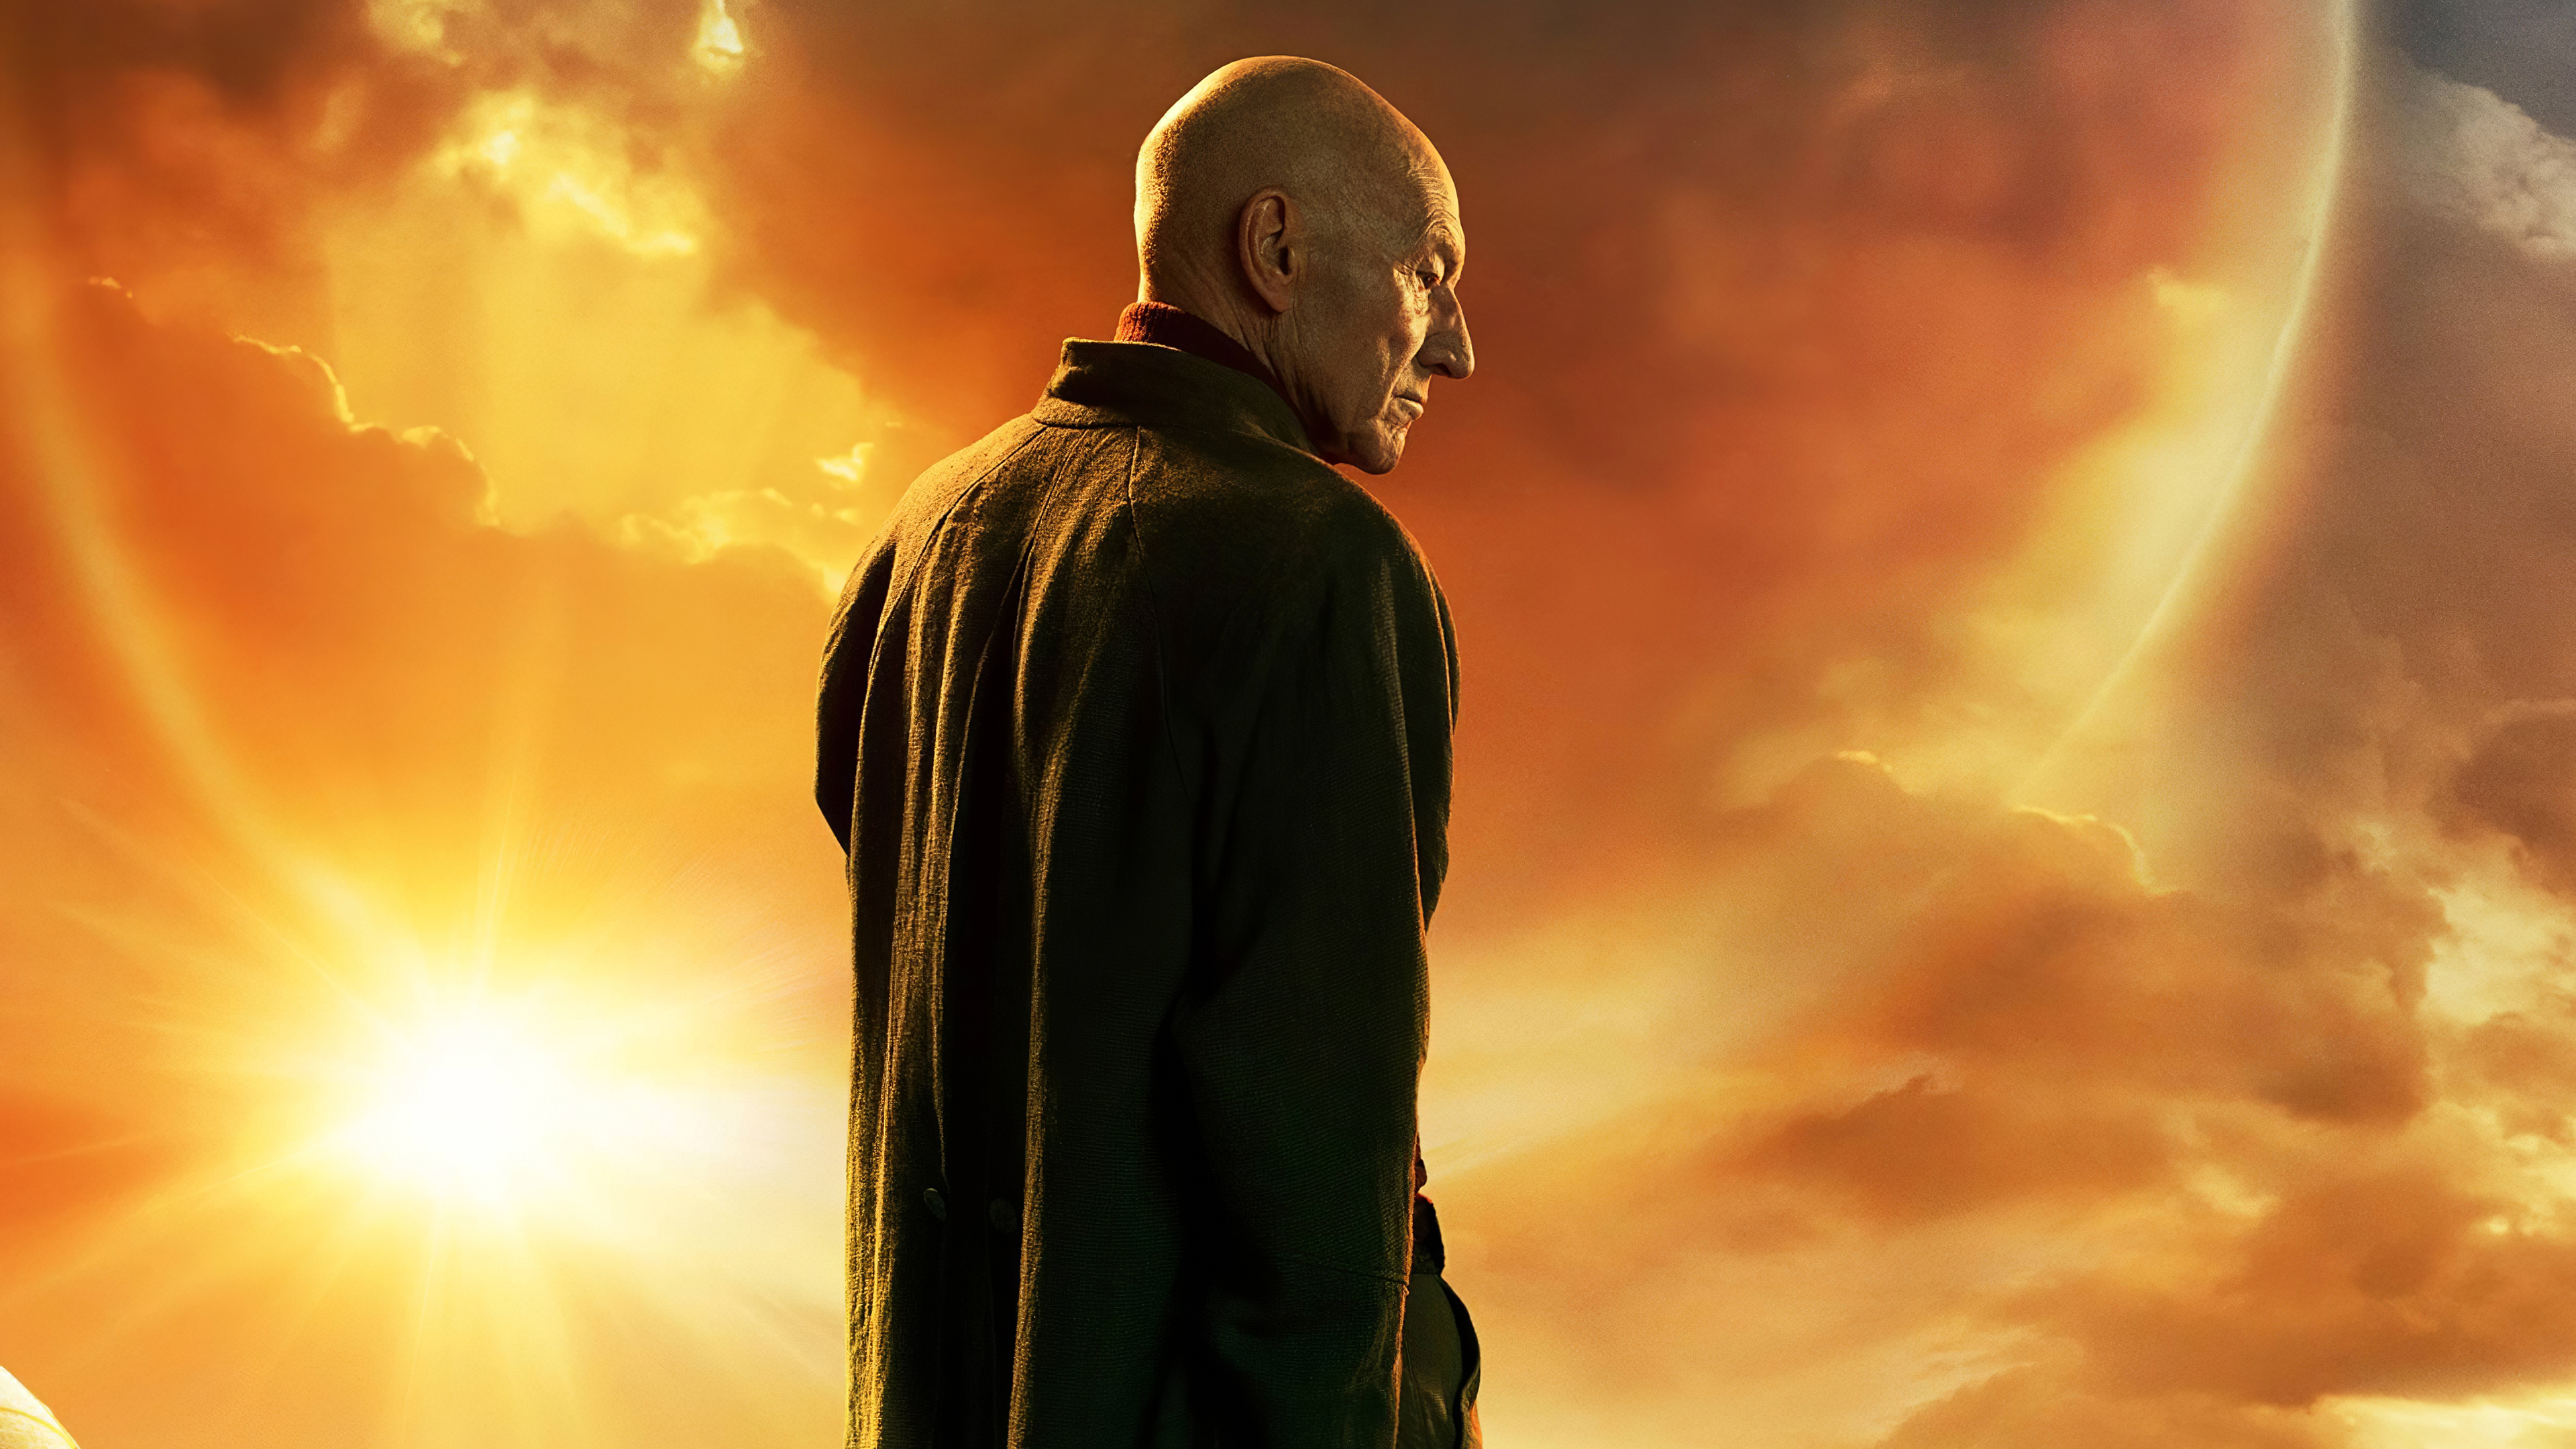 Picard wallpaper for those that want it  rPicard